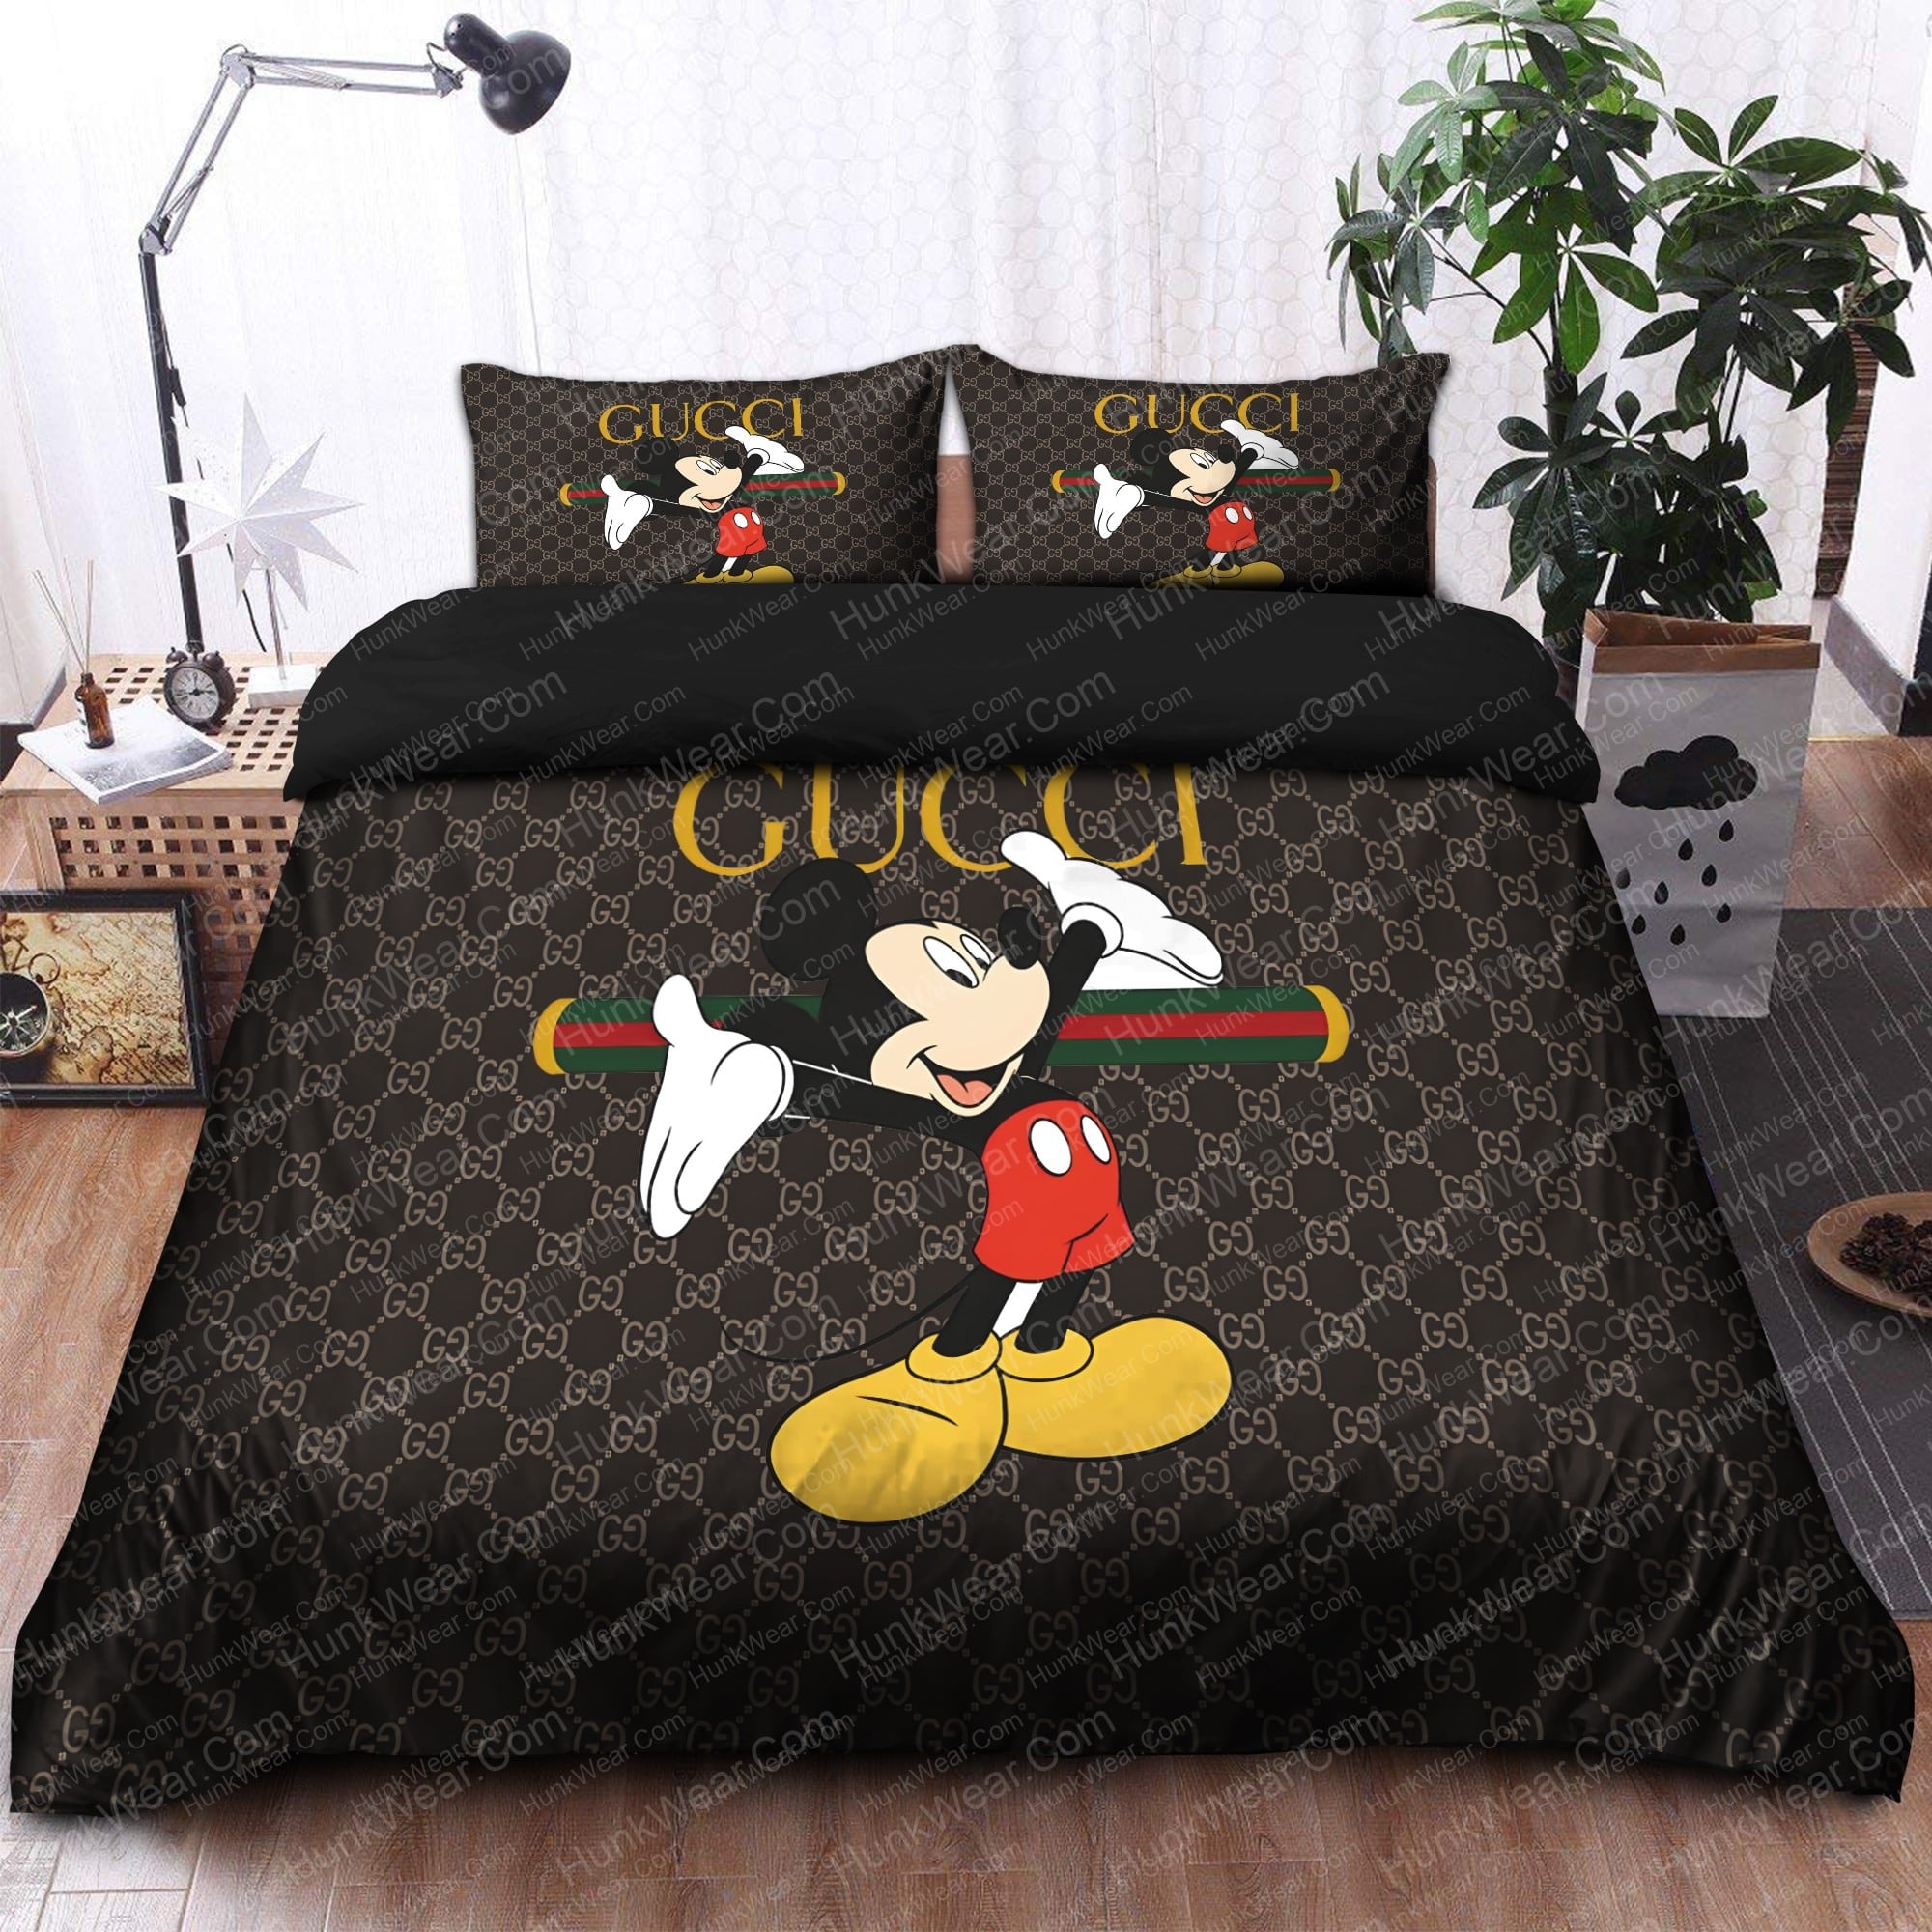 mickey mouse gucci bedding sets 2